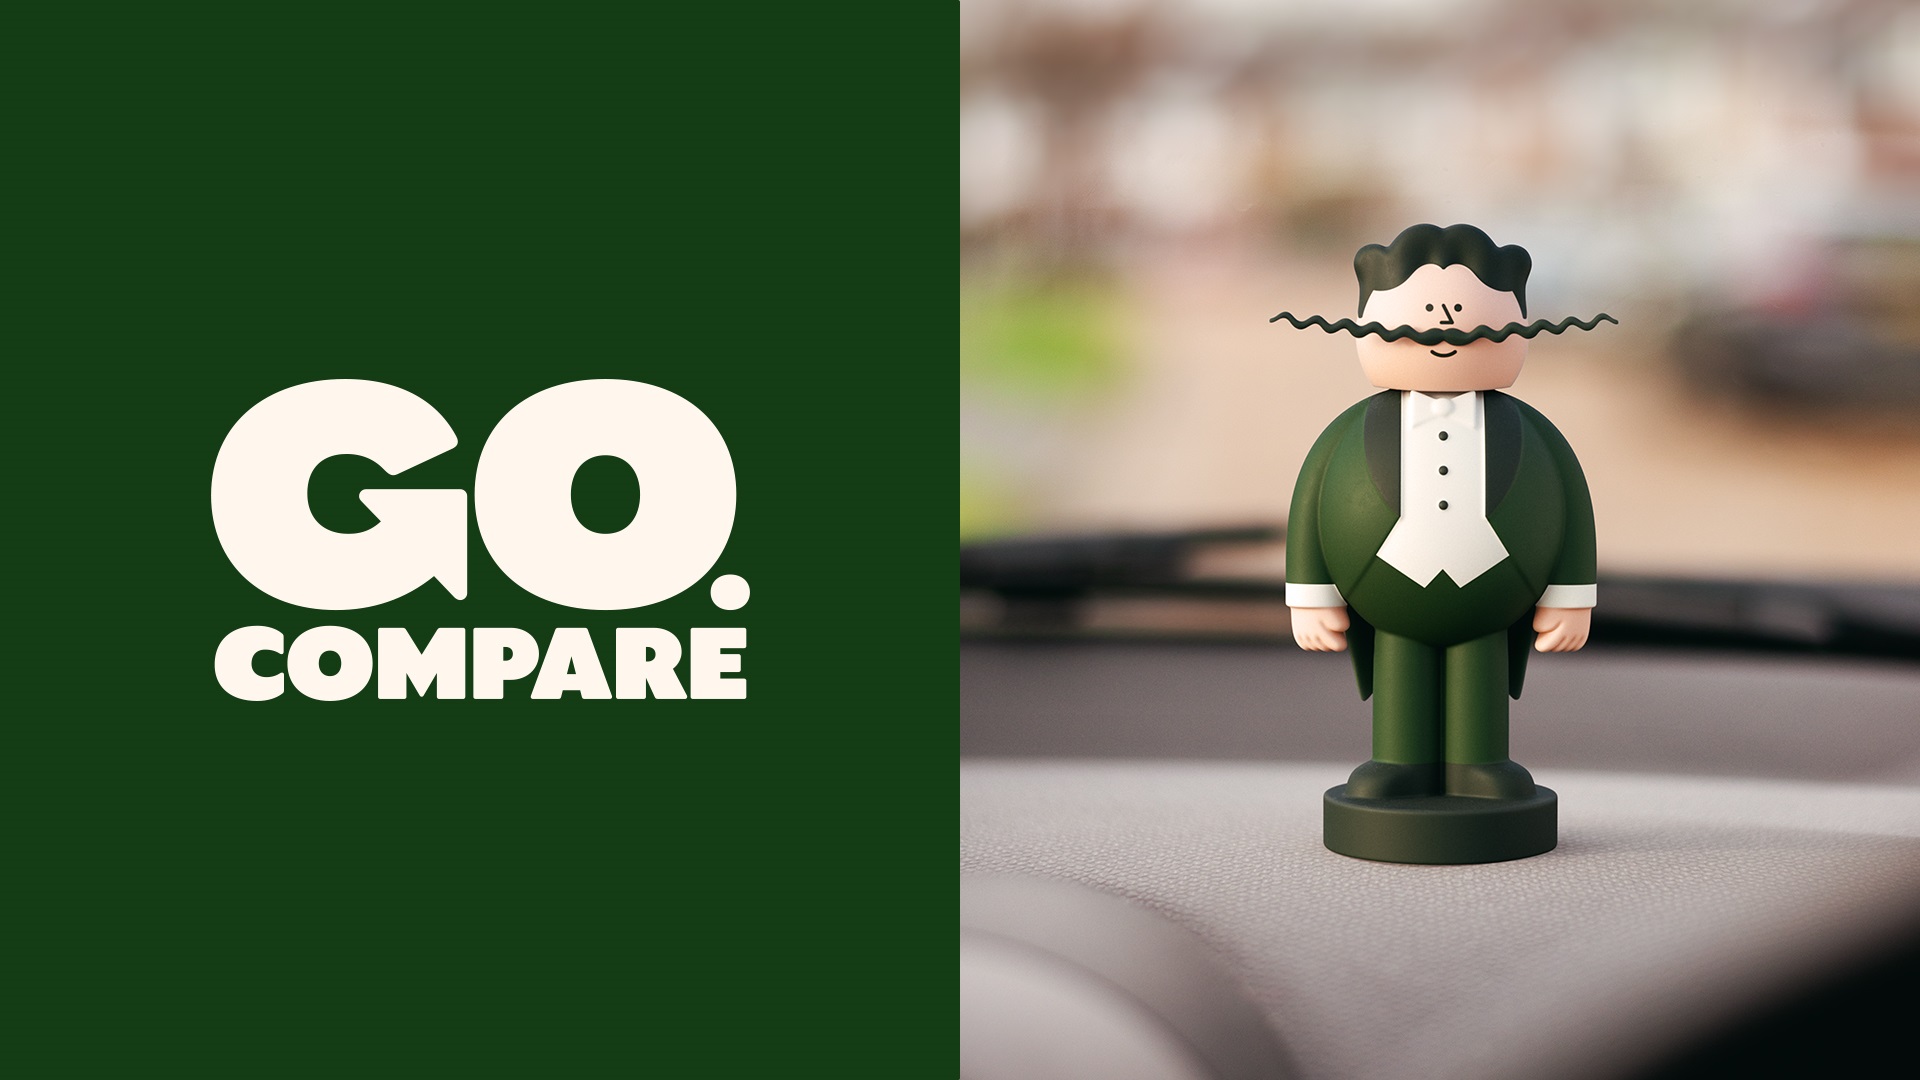 Go.compare Becomes the Champion of Choice With Bold Rebrand From Ragged Edge